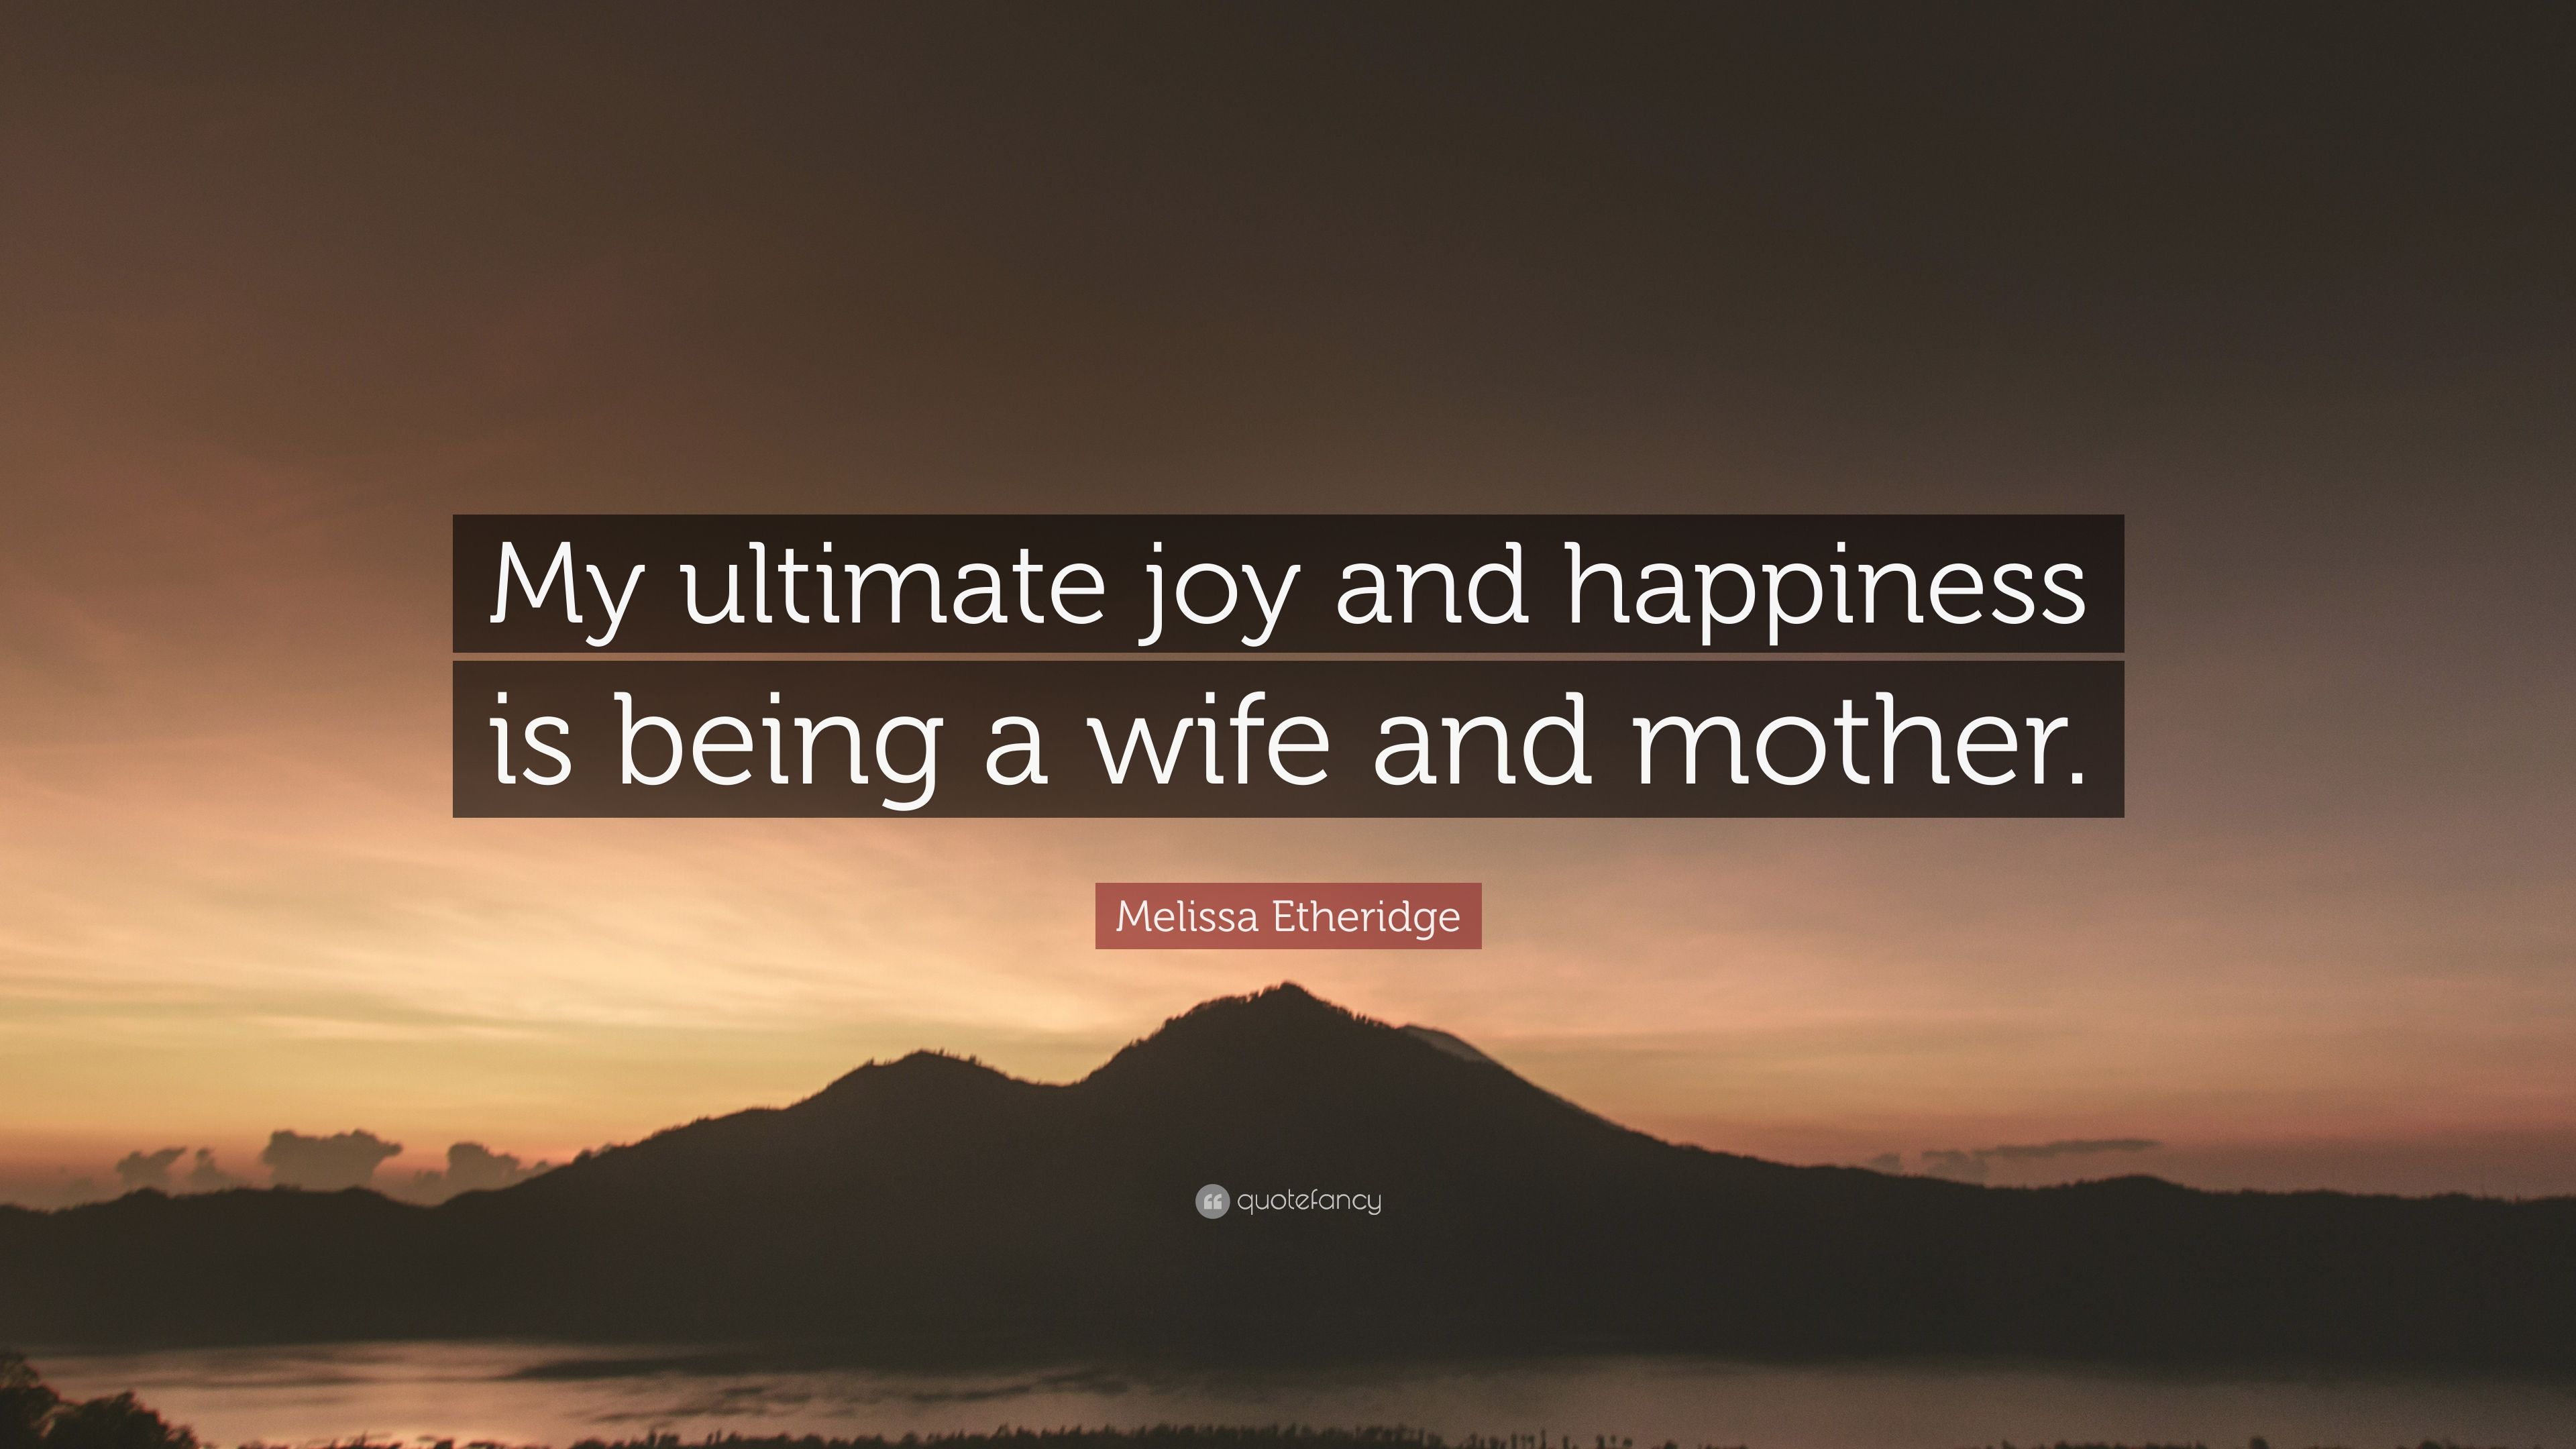 Melissa Etheridge Quote: “My ultimate joy and happiness is being a